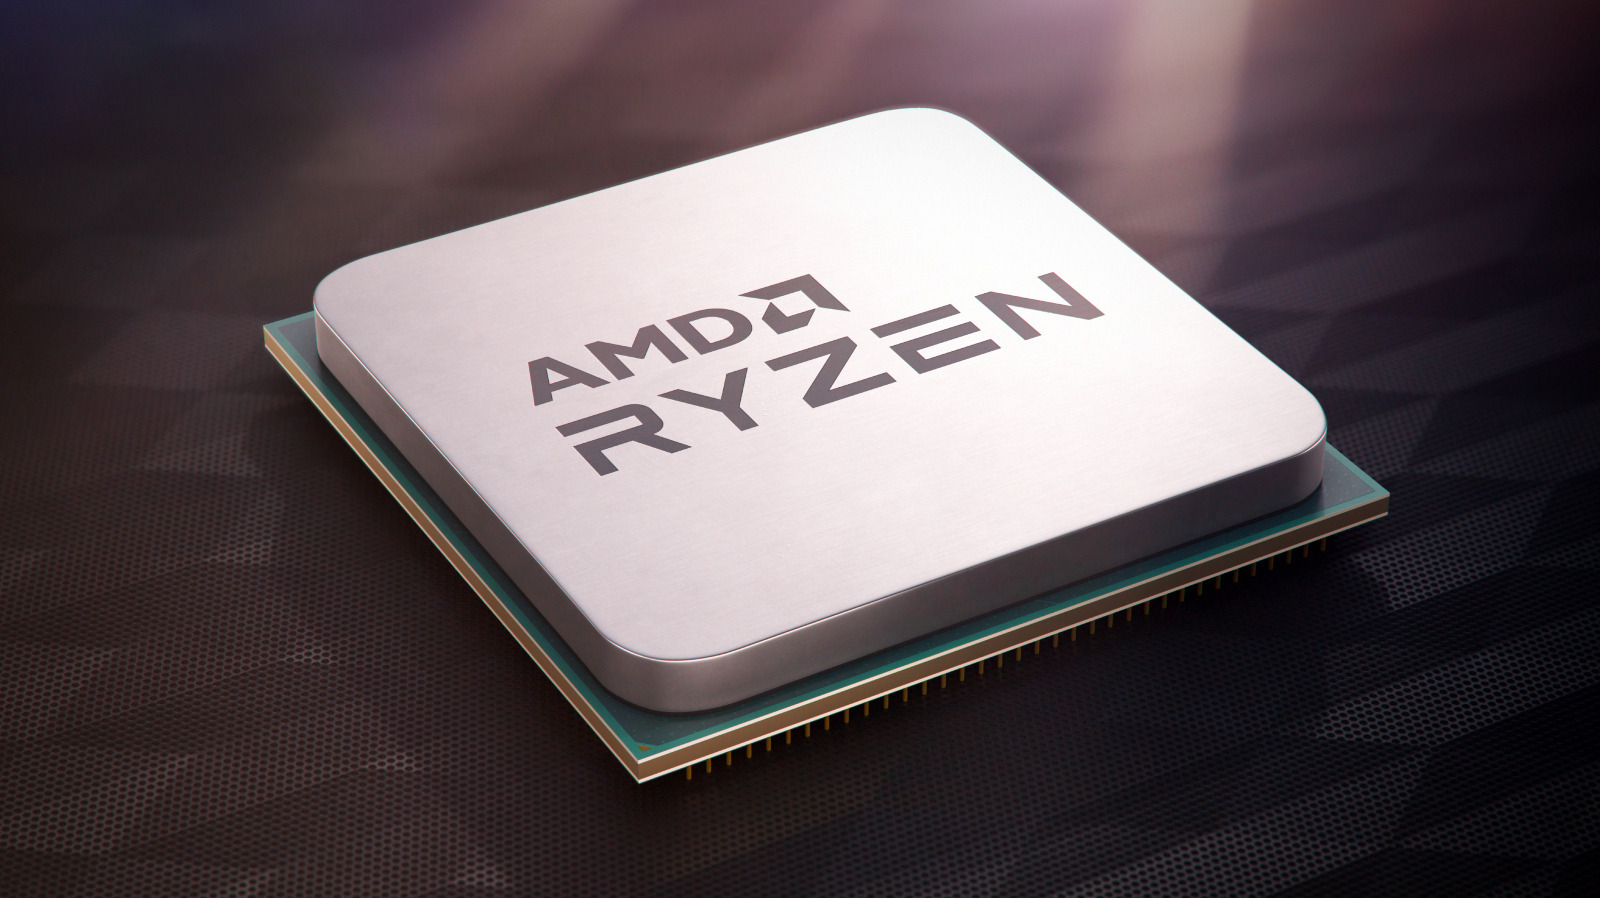 amd-s-ryzen-7000-cpus-officially-unveiled-here-s-when-you-can-buy-them